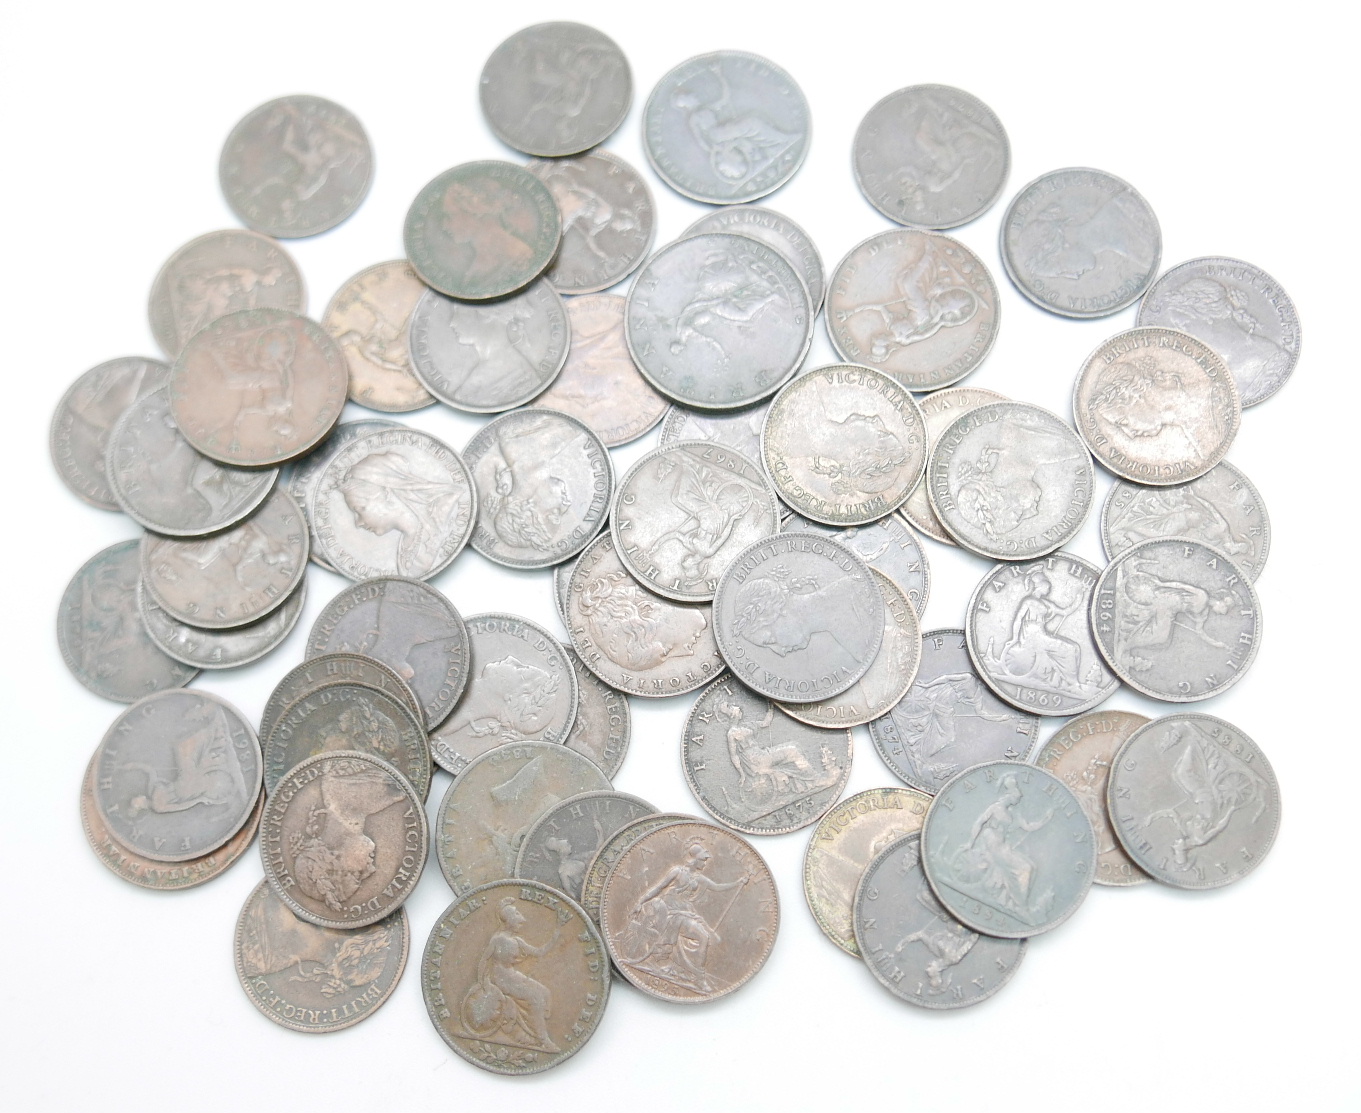 60 Queen Victoria and earlier farthings